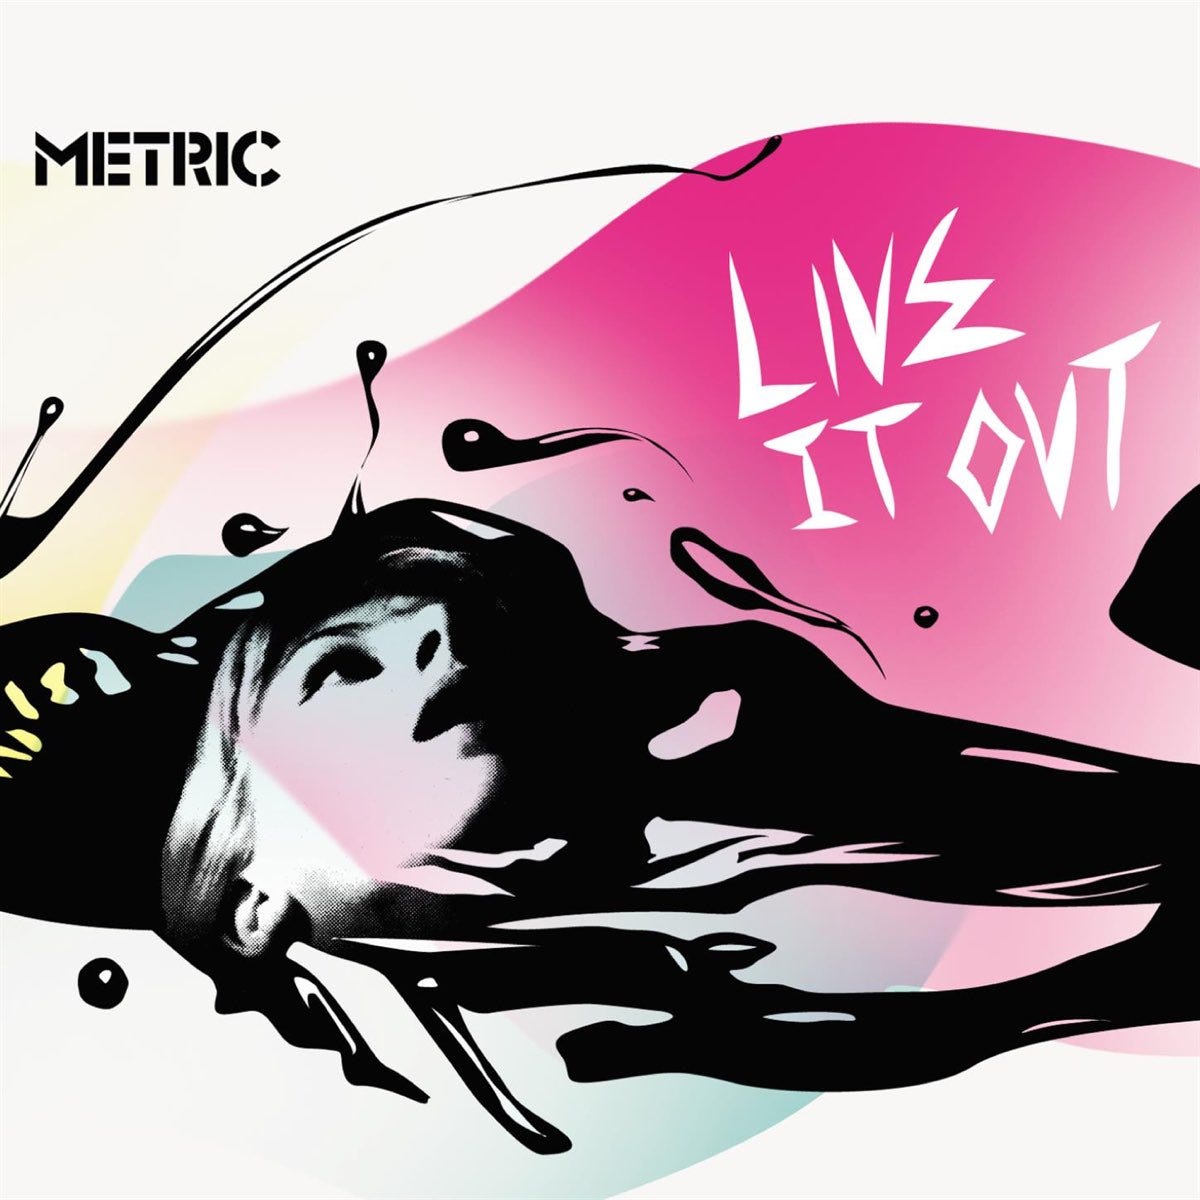 Live It Out - Album by Metric - Apple Music